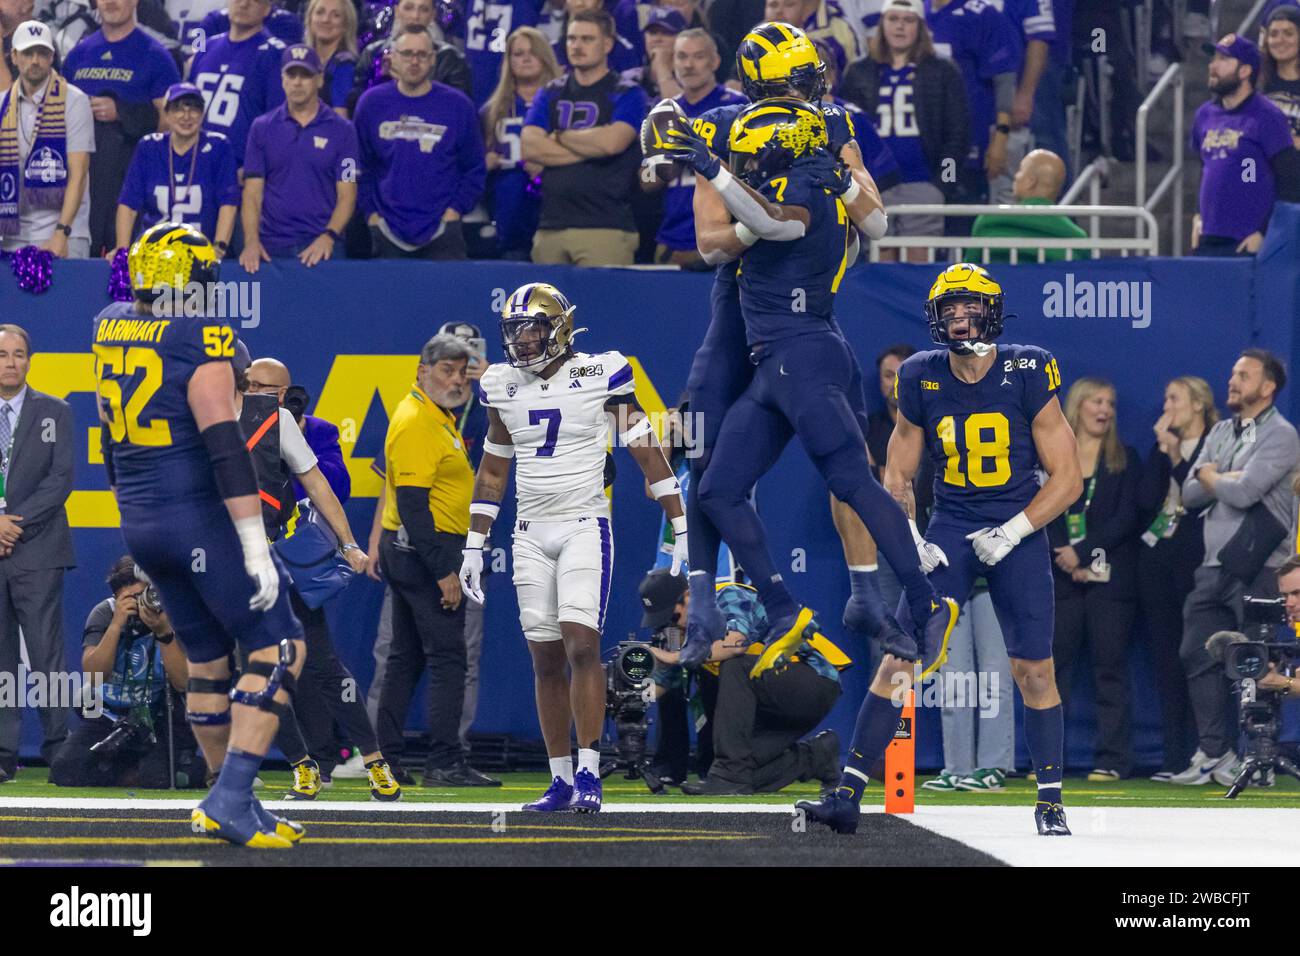 Michigan Wolverines running back Donovan Edwards (7) and defensive lineman Alessandro Lorenzetti (89) celebrate a touchdown against the Washington Hus Stock Photo